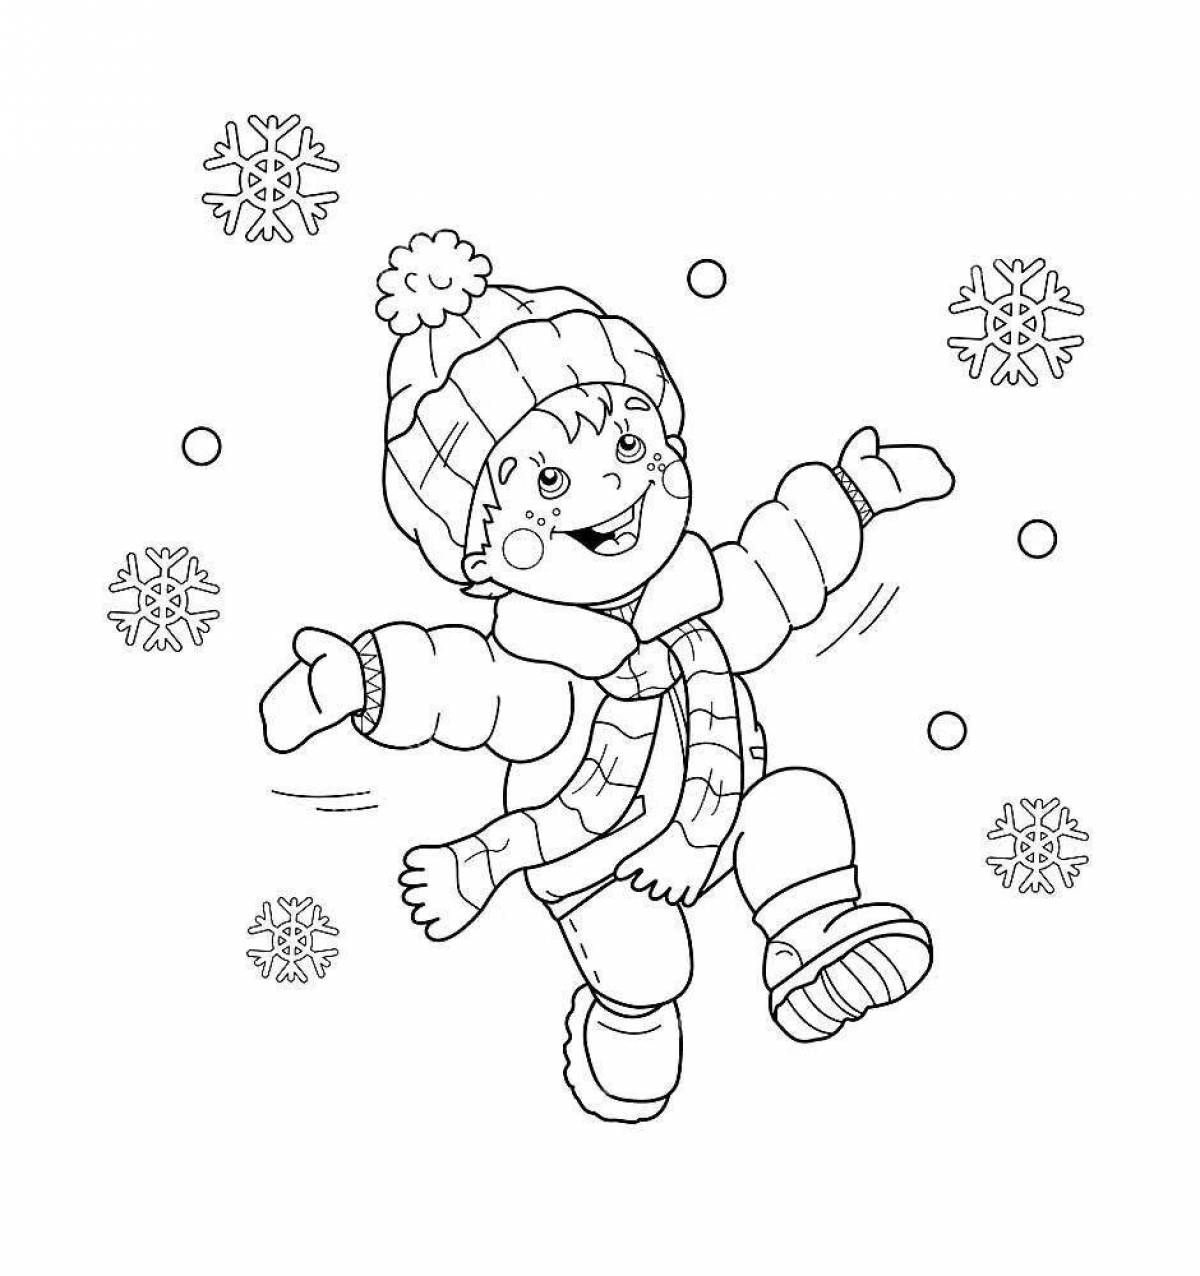 Snowball coloring book for kids